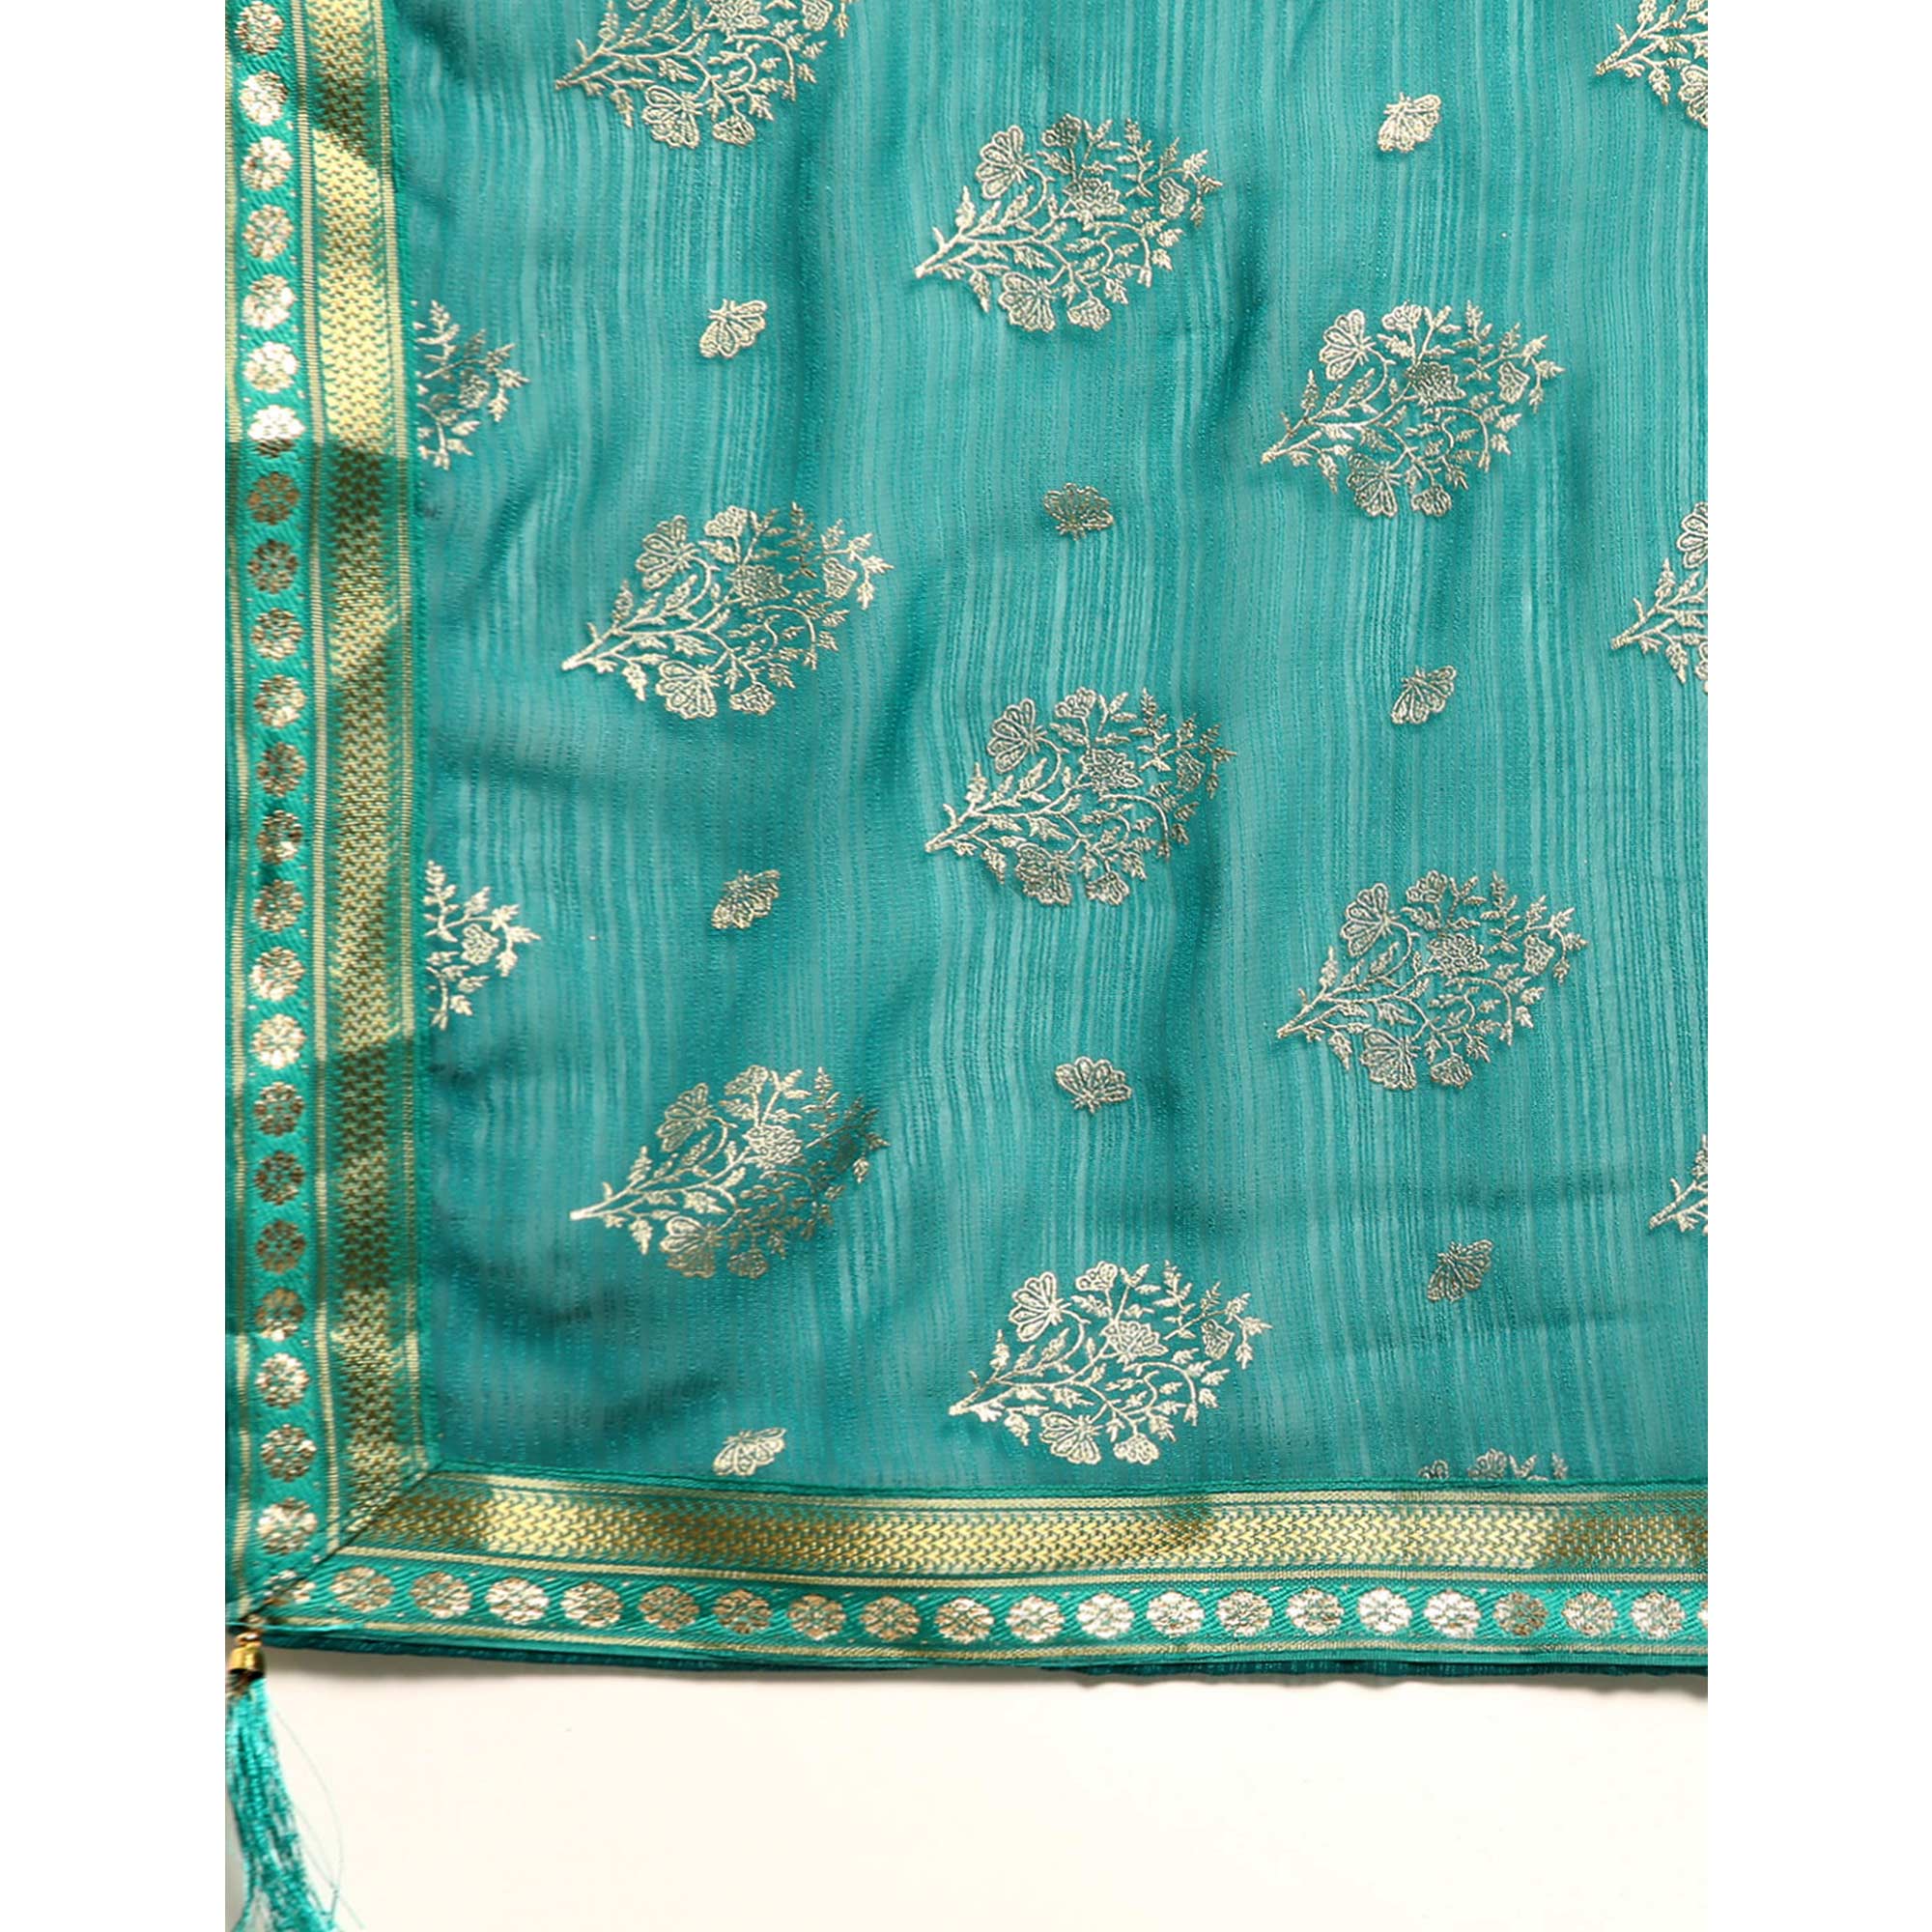 Turquoise  Floral Foil Printed Chiffon Saree With Tassels